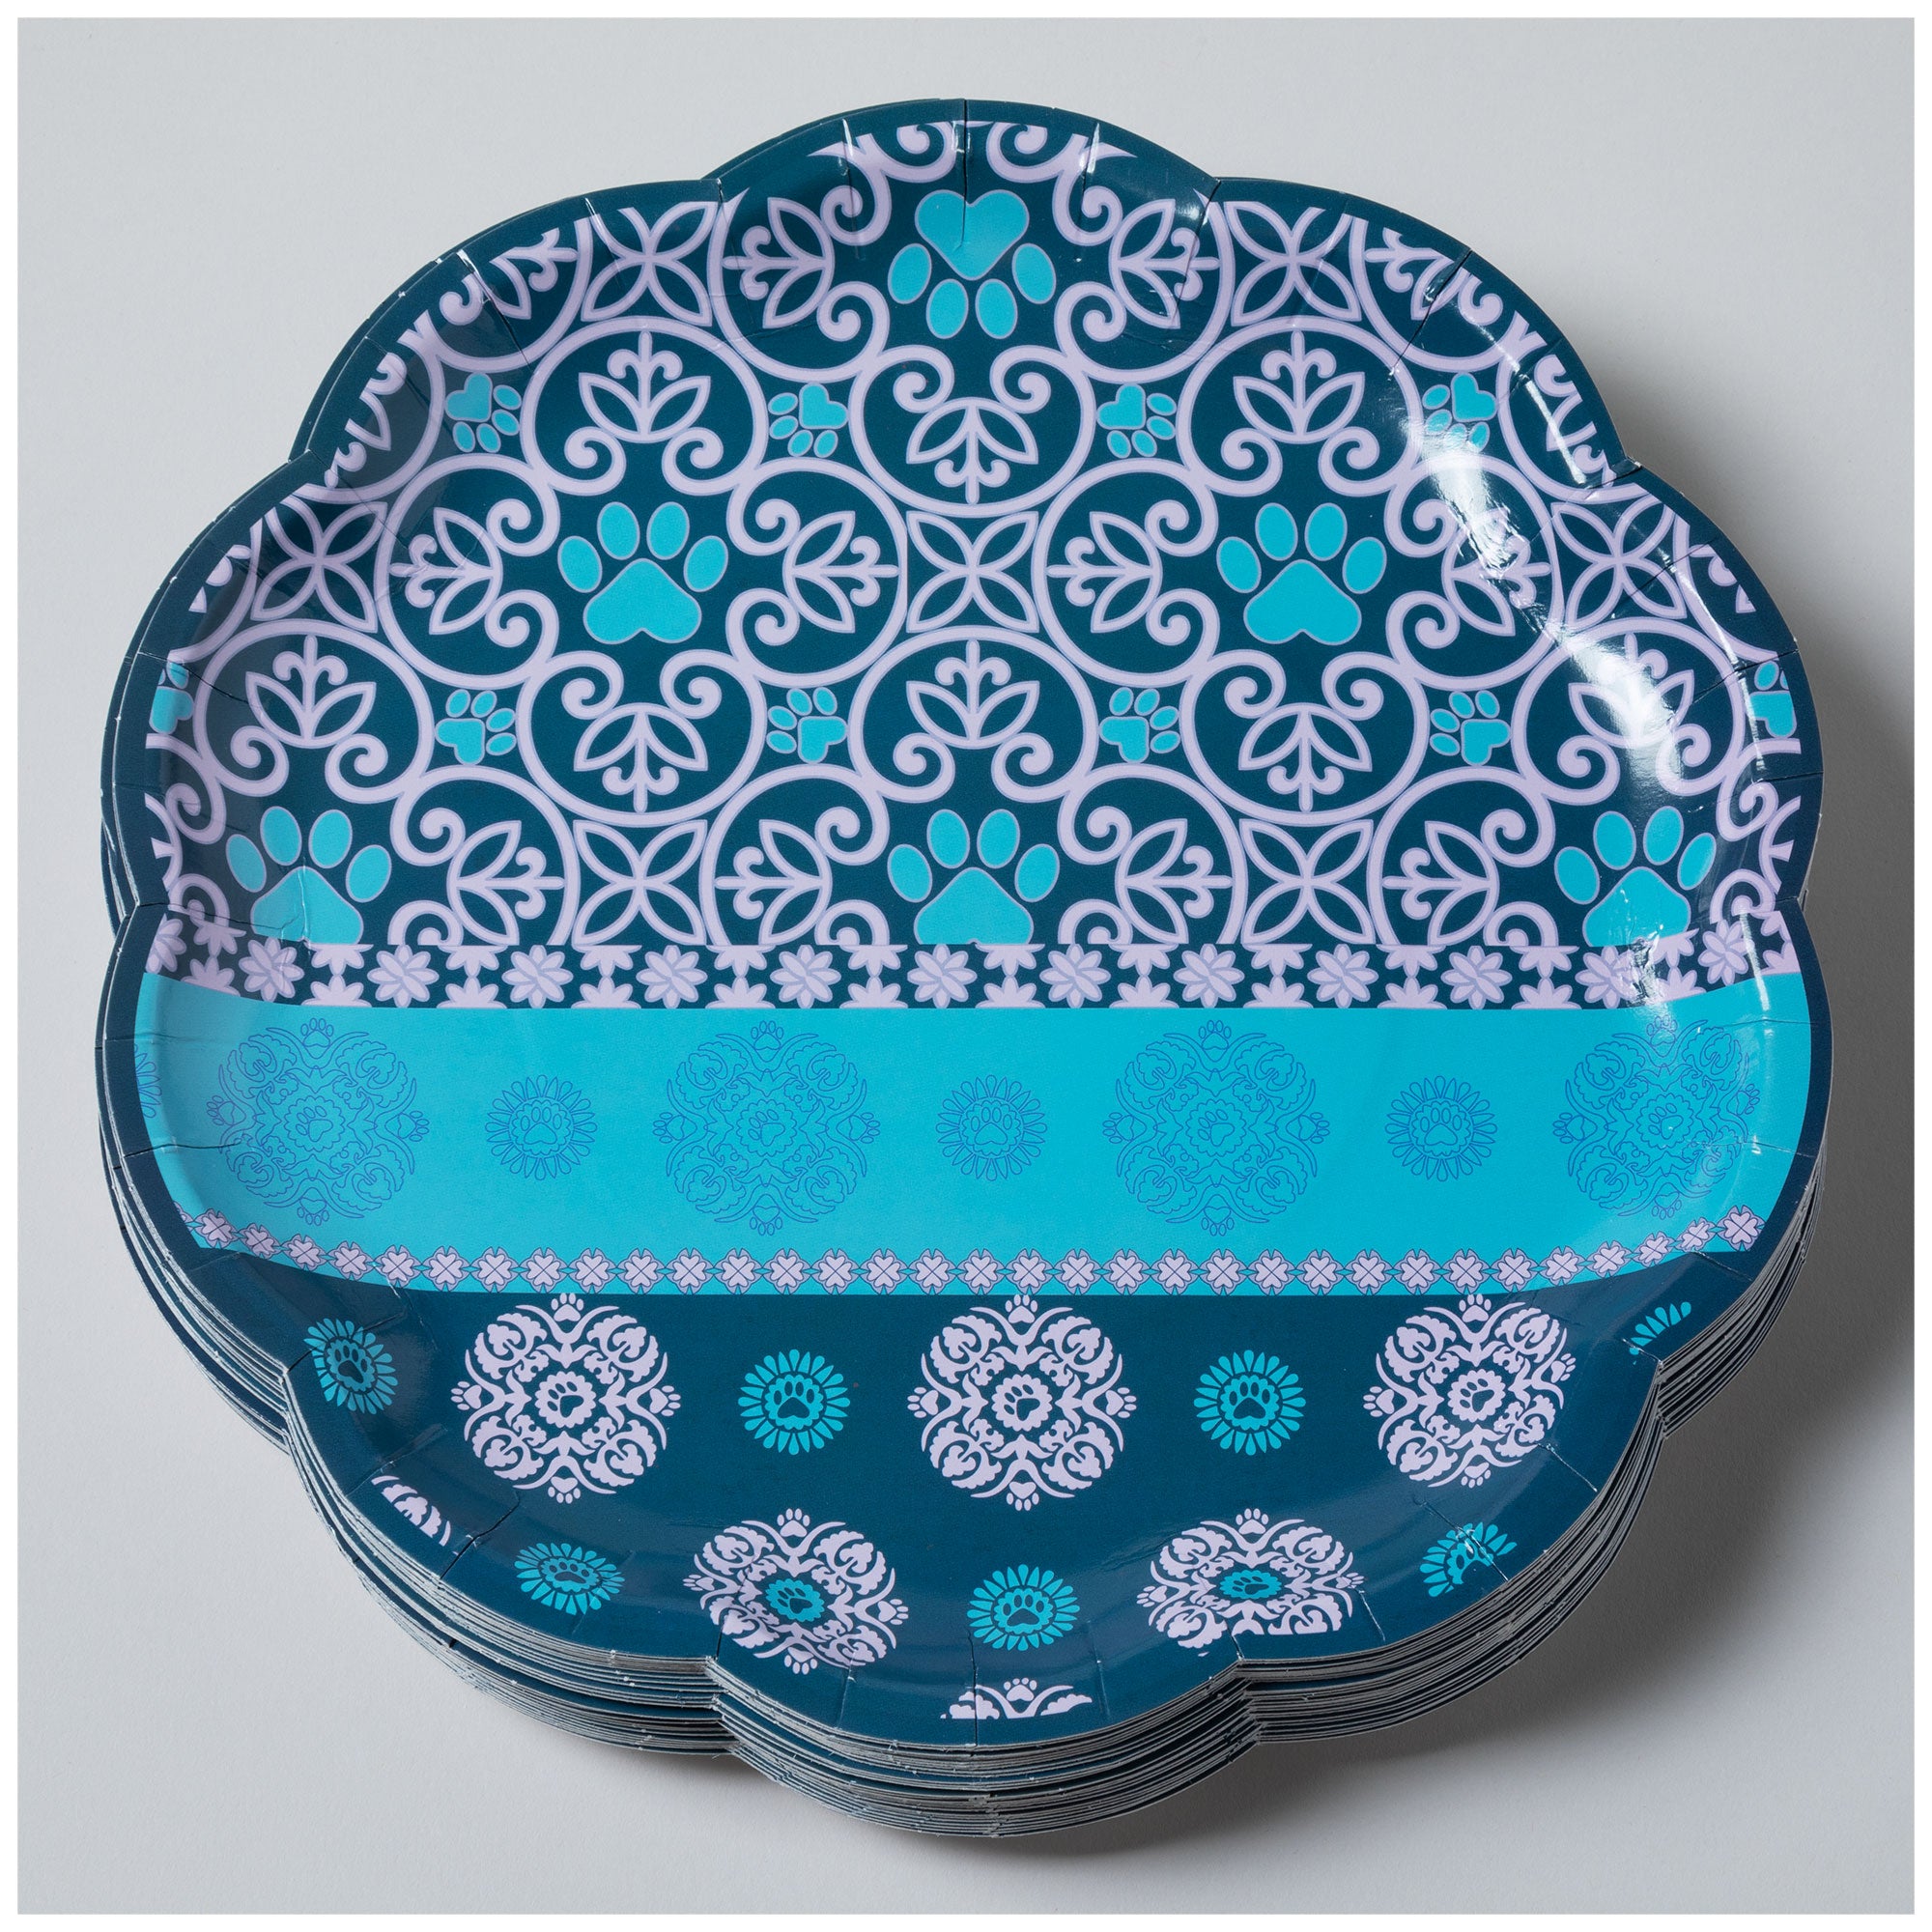 Pawfect Occasion Paper Plates & Napkins - Perfectly Patterned Paws - Plates Only